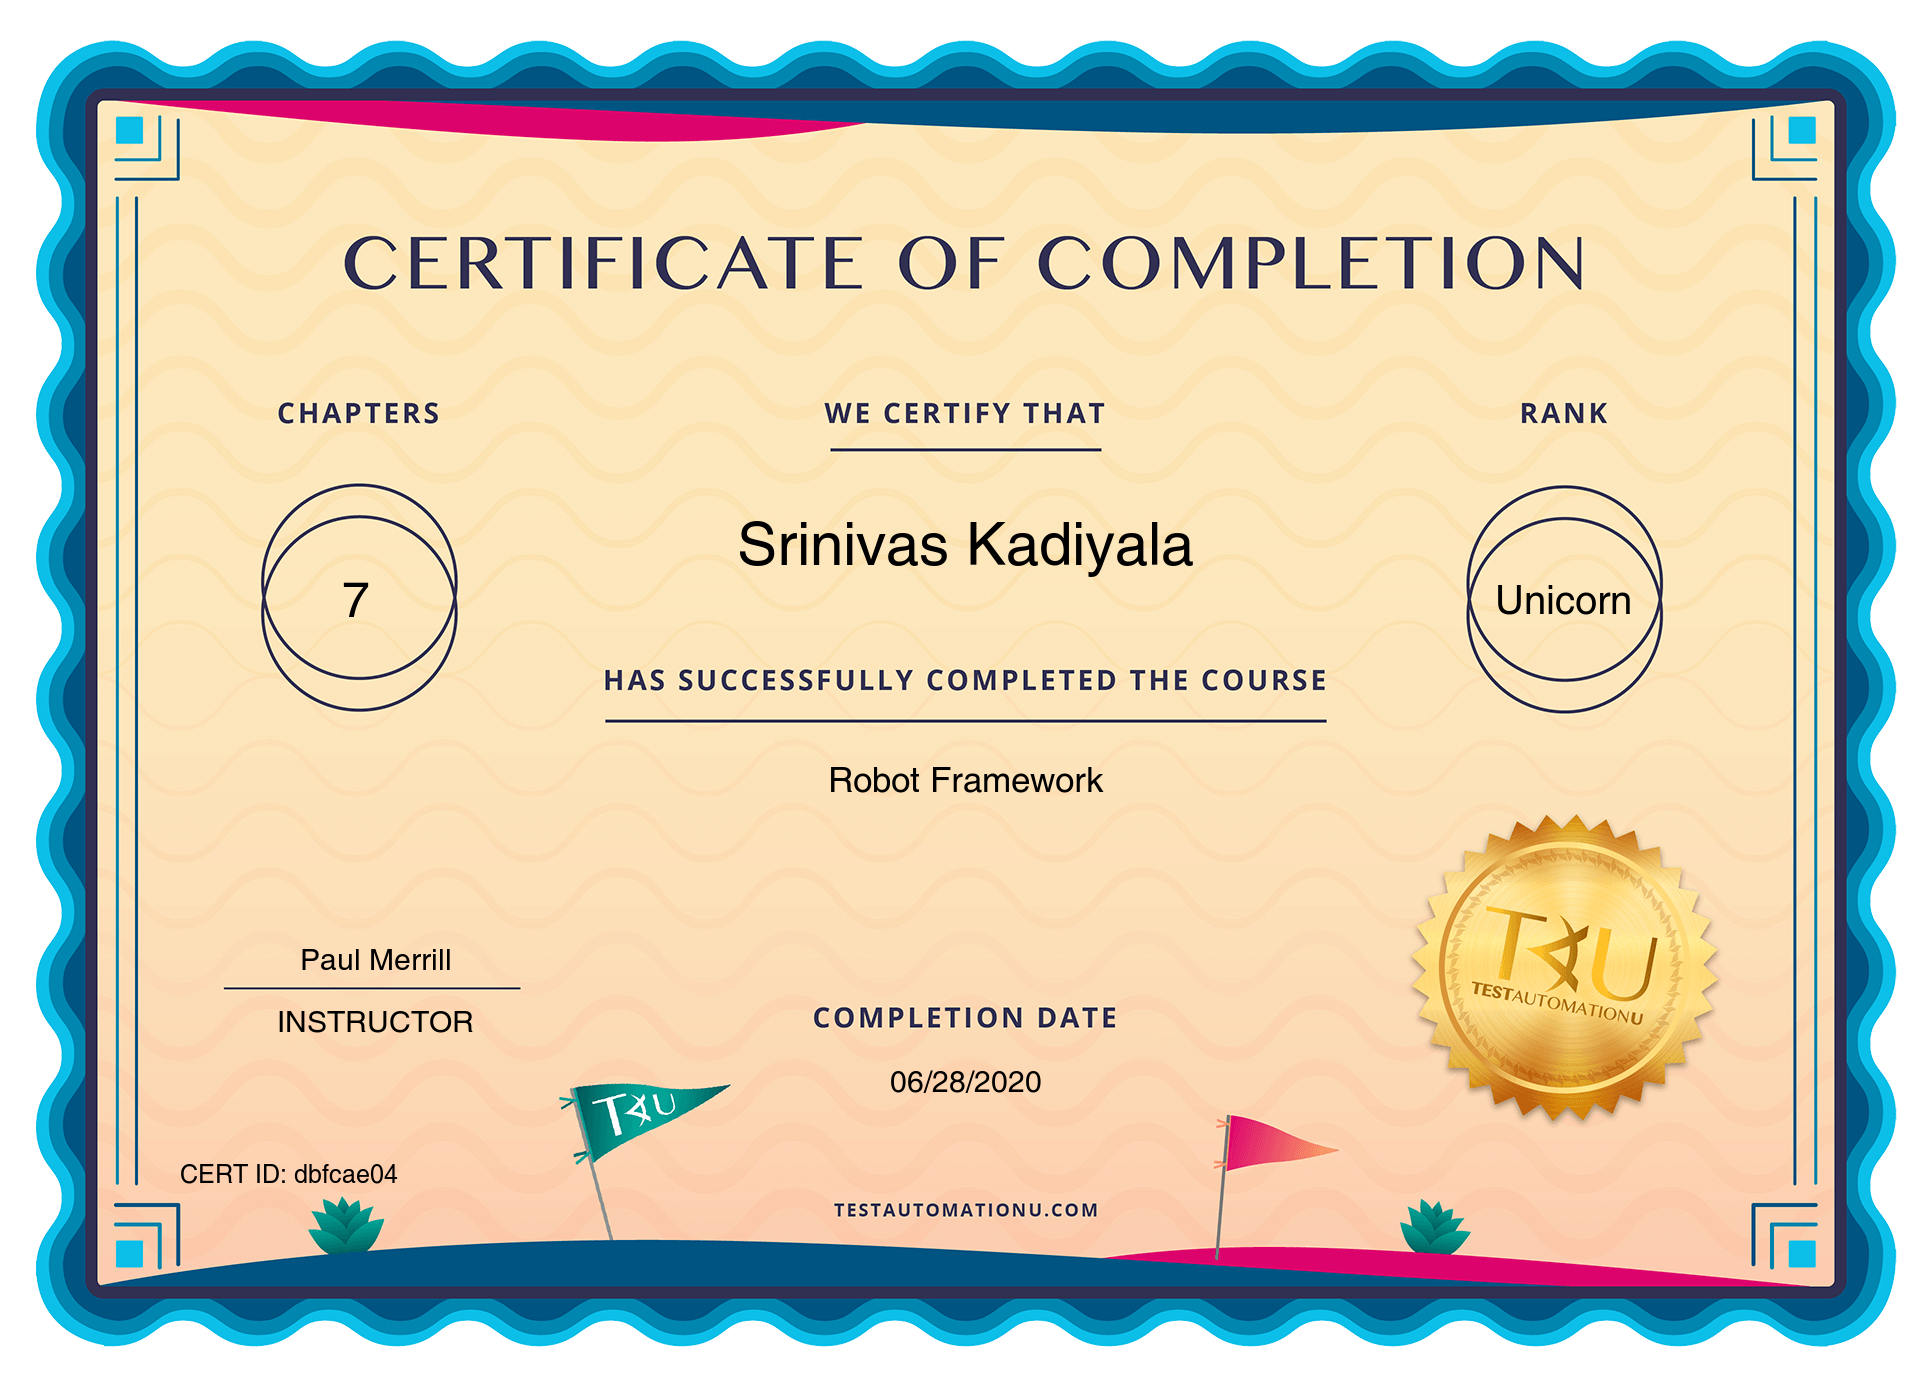 Certificate of completion of the course. Certificate for successful completion course. Certificate successfully completed the course. Certificate of completion has successfully completed.